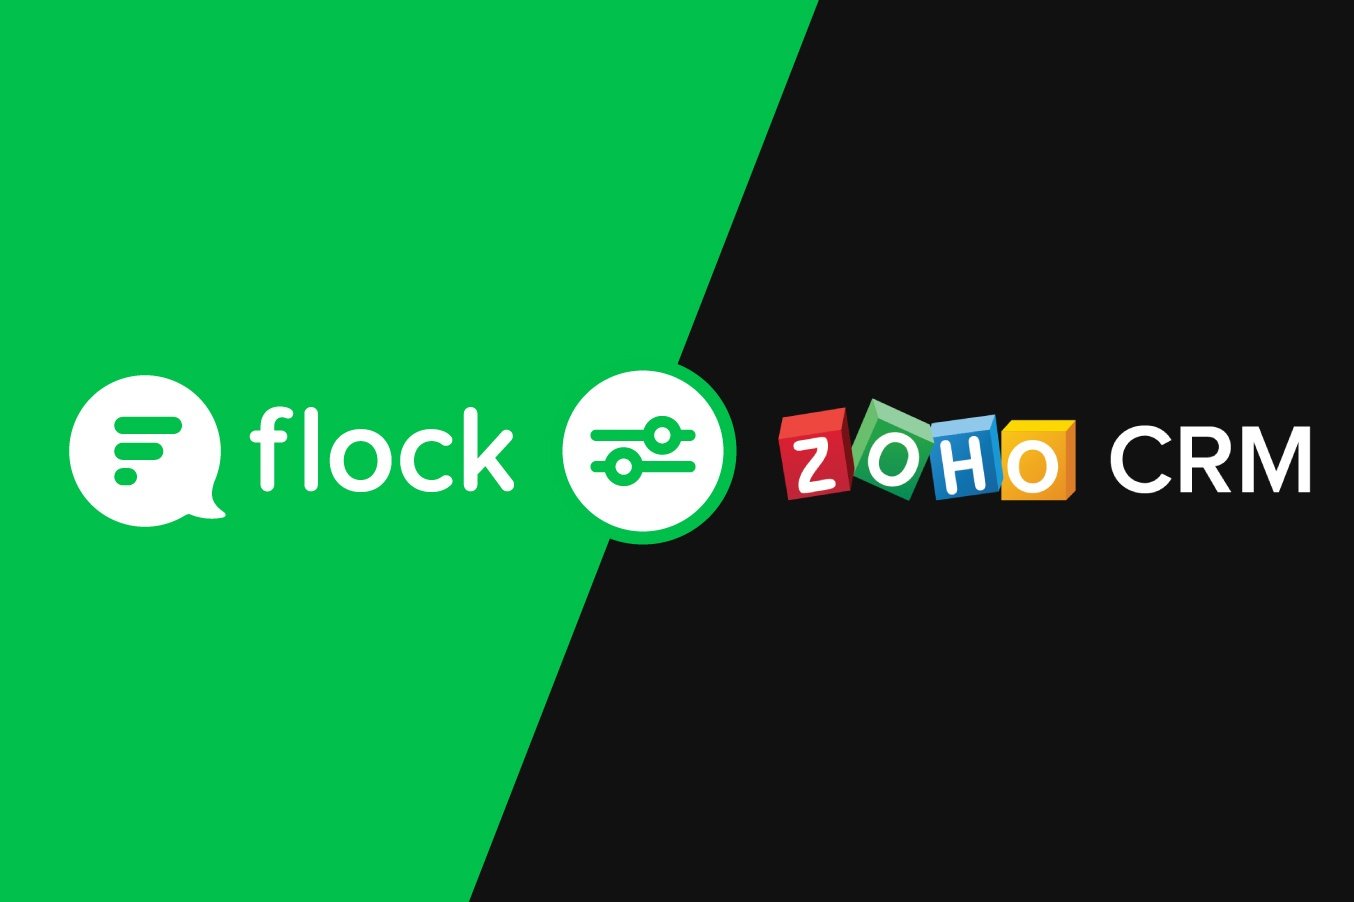 Zoho CRM and Flock